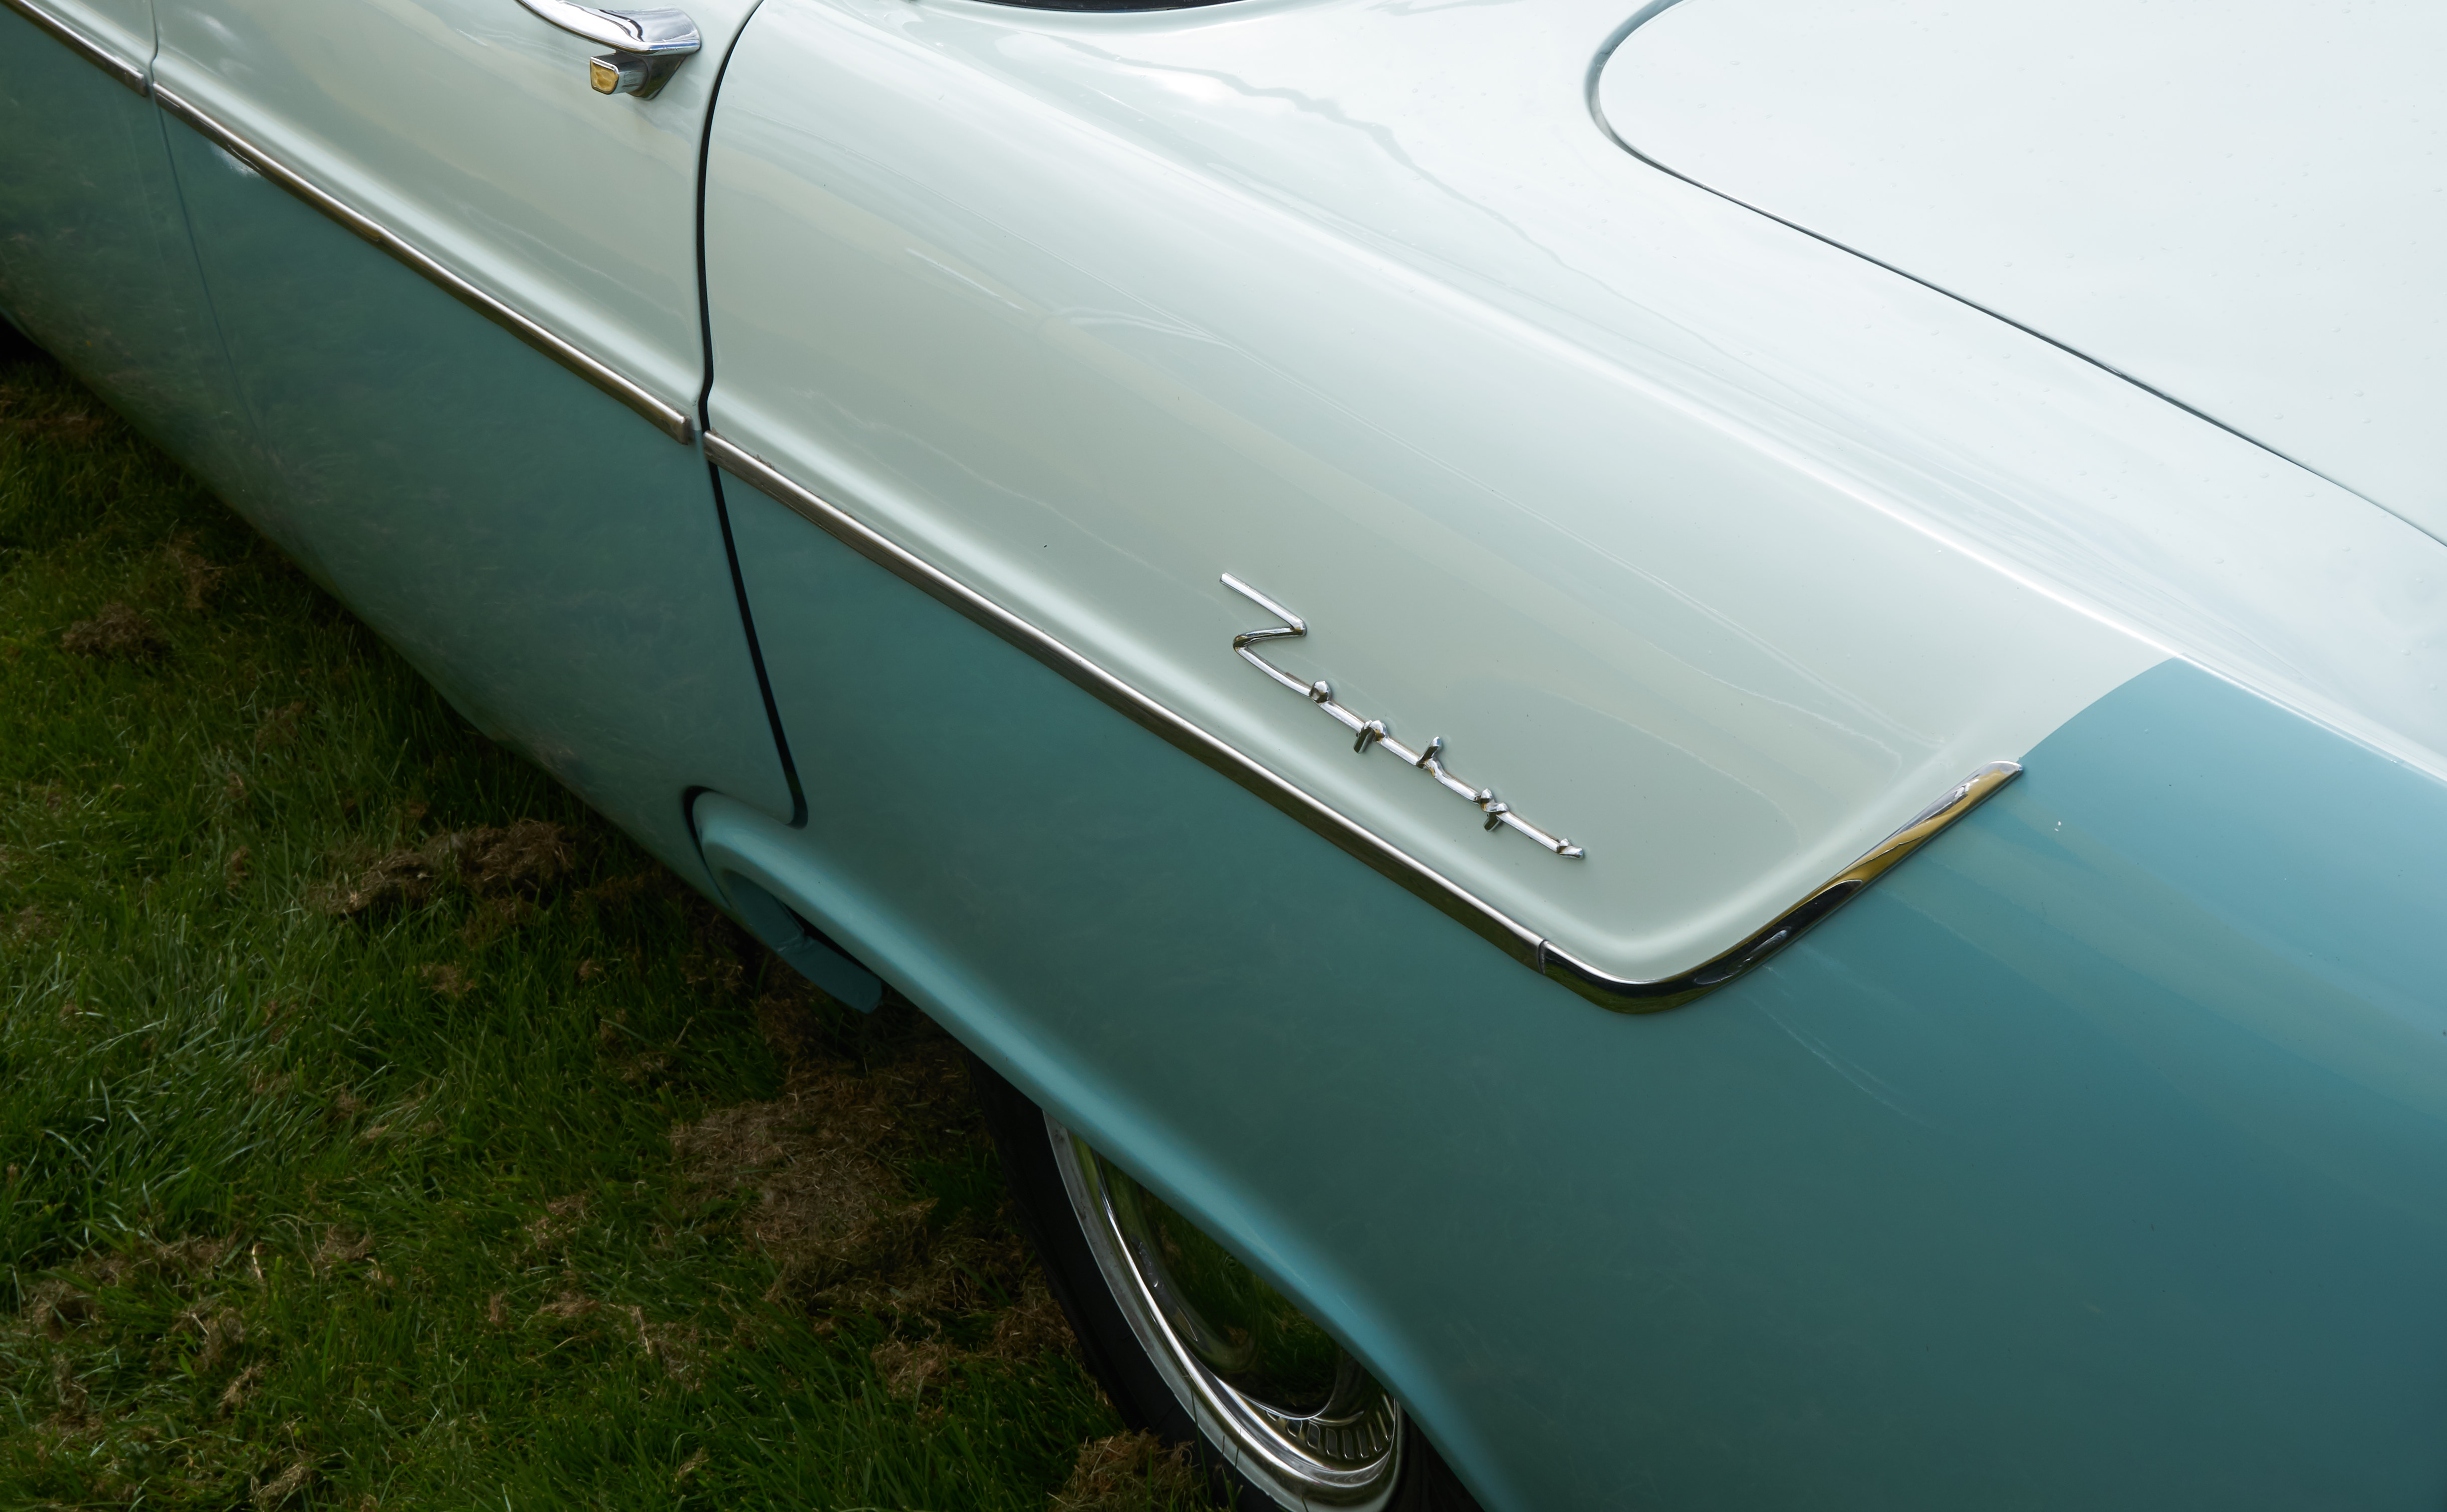 Ford zephyr mk ii tail photo